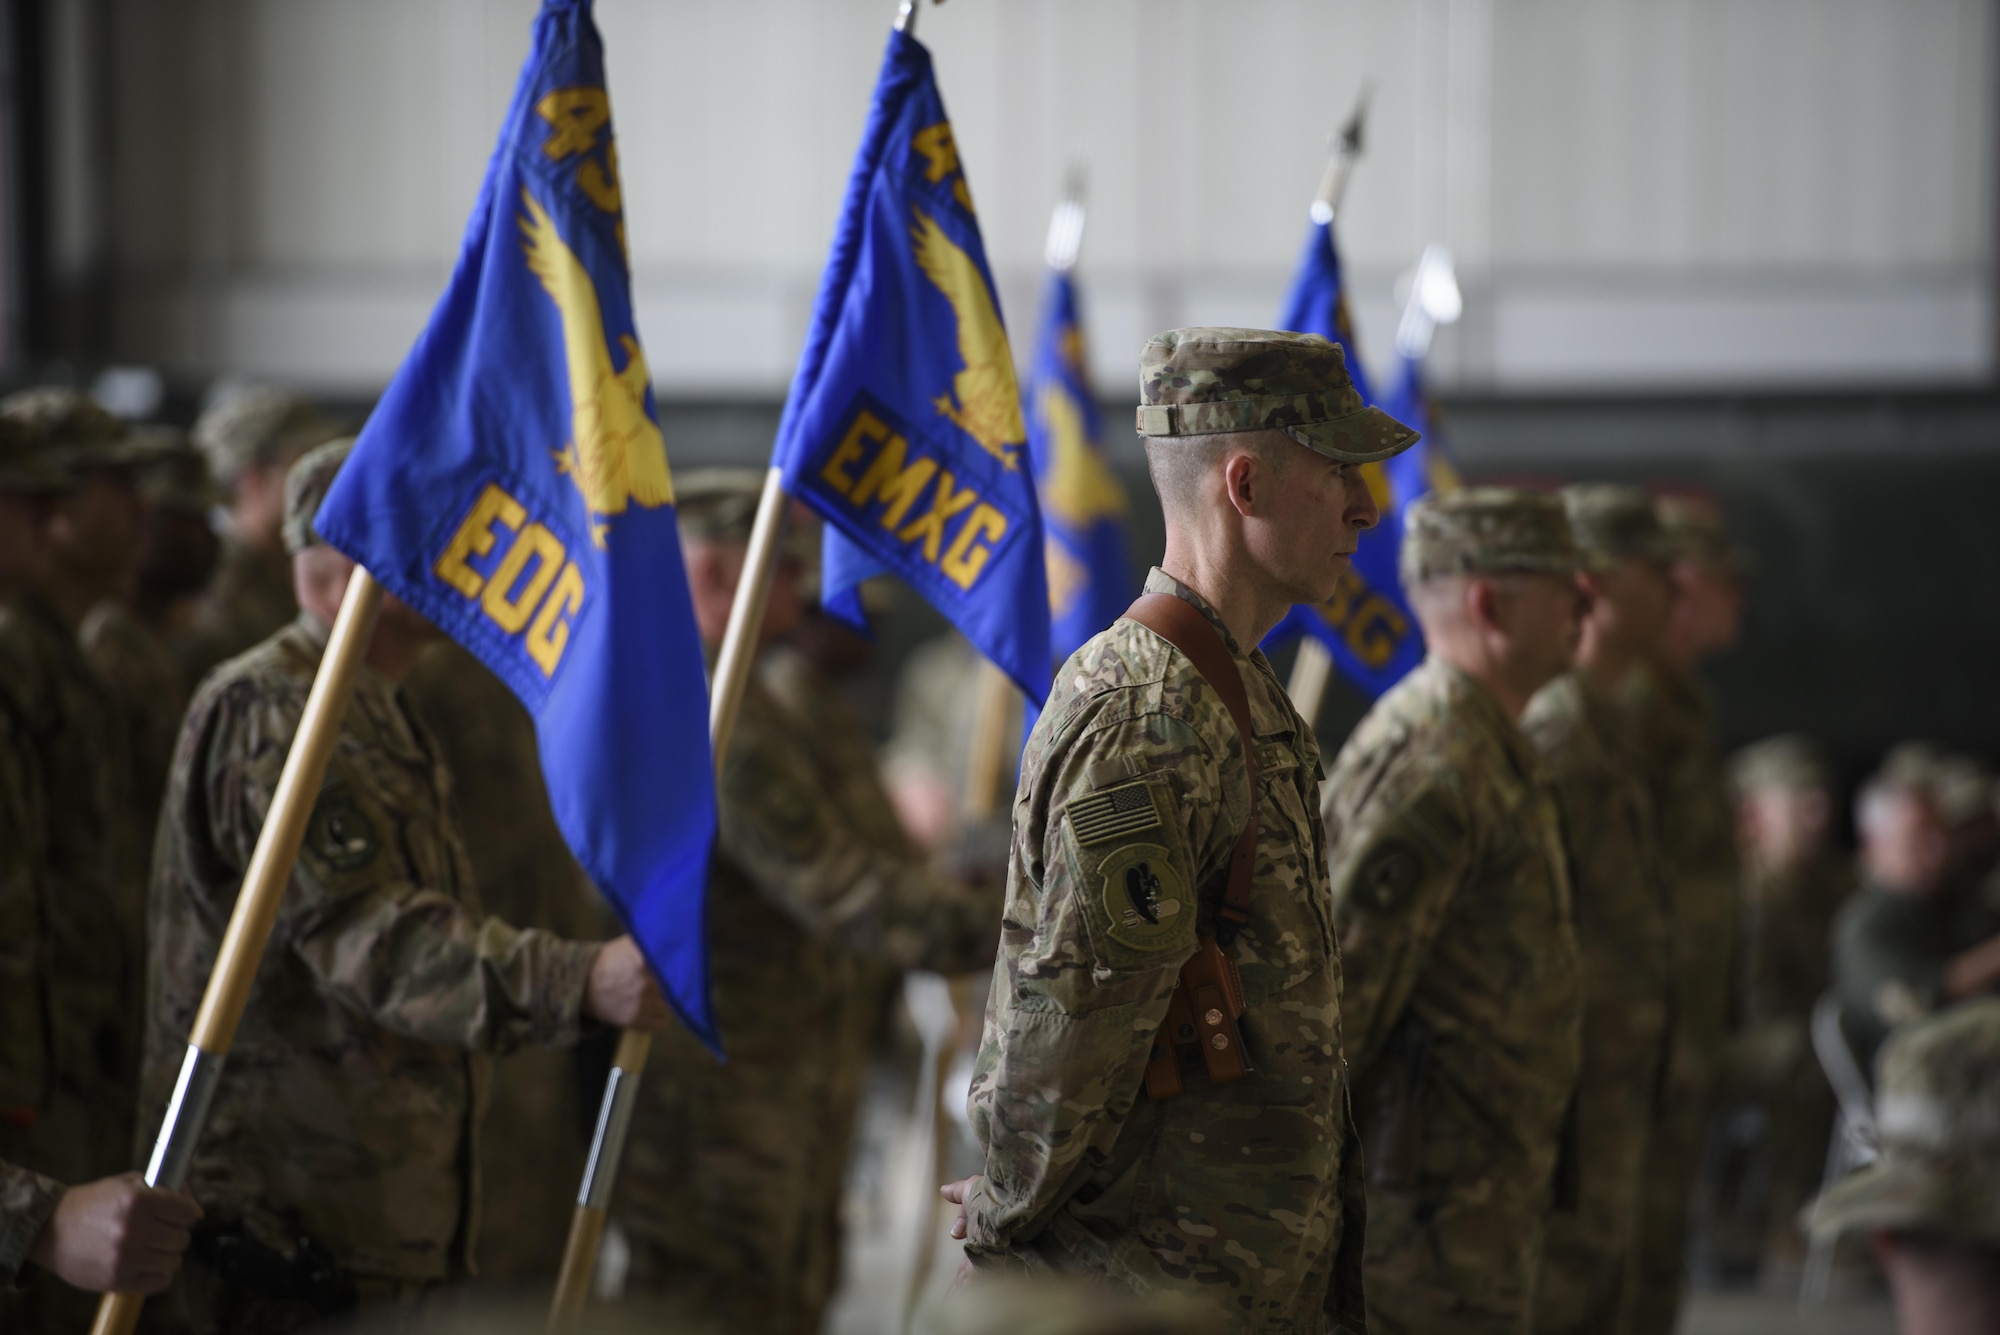 Col. Jason Bailey, the 455th Expeditionary Operations Group commander, stands at parade rest during a change of command ceremony at Bagram Airfield, Afghanistan, June 3, 2017. During the ceremony, Brig. Gen. Jim Sears relinquished command of the 455th Air Expeditionary Wing to Brig. Gen Craig Baker. (U.S. Air Force photo by Staff Sgt. Benjamin Gonsier)